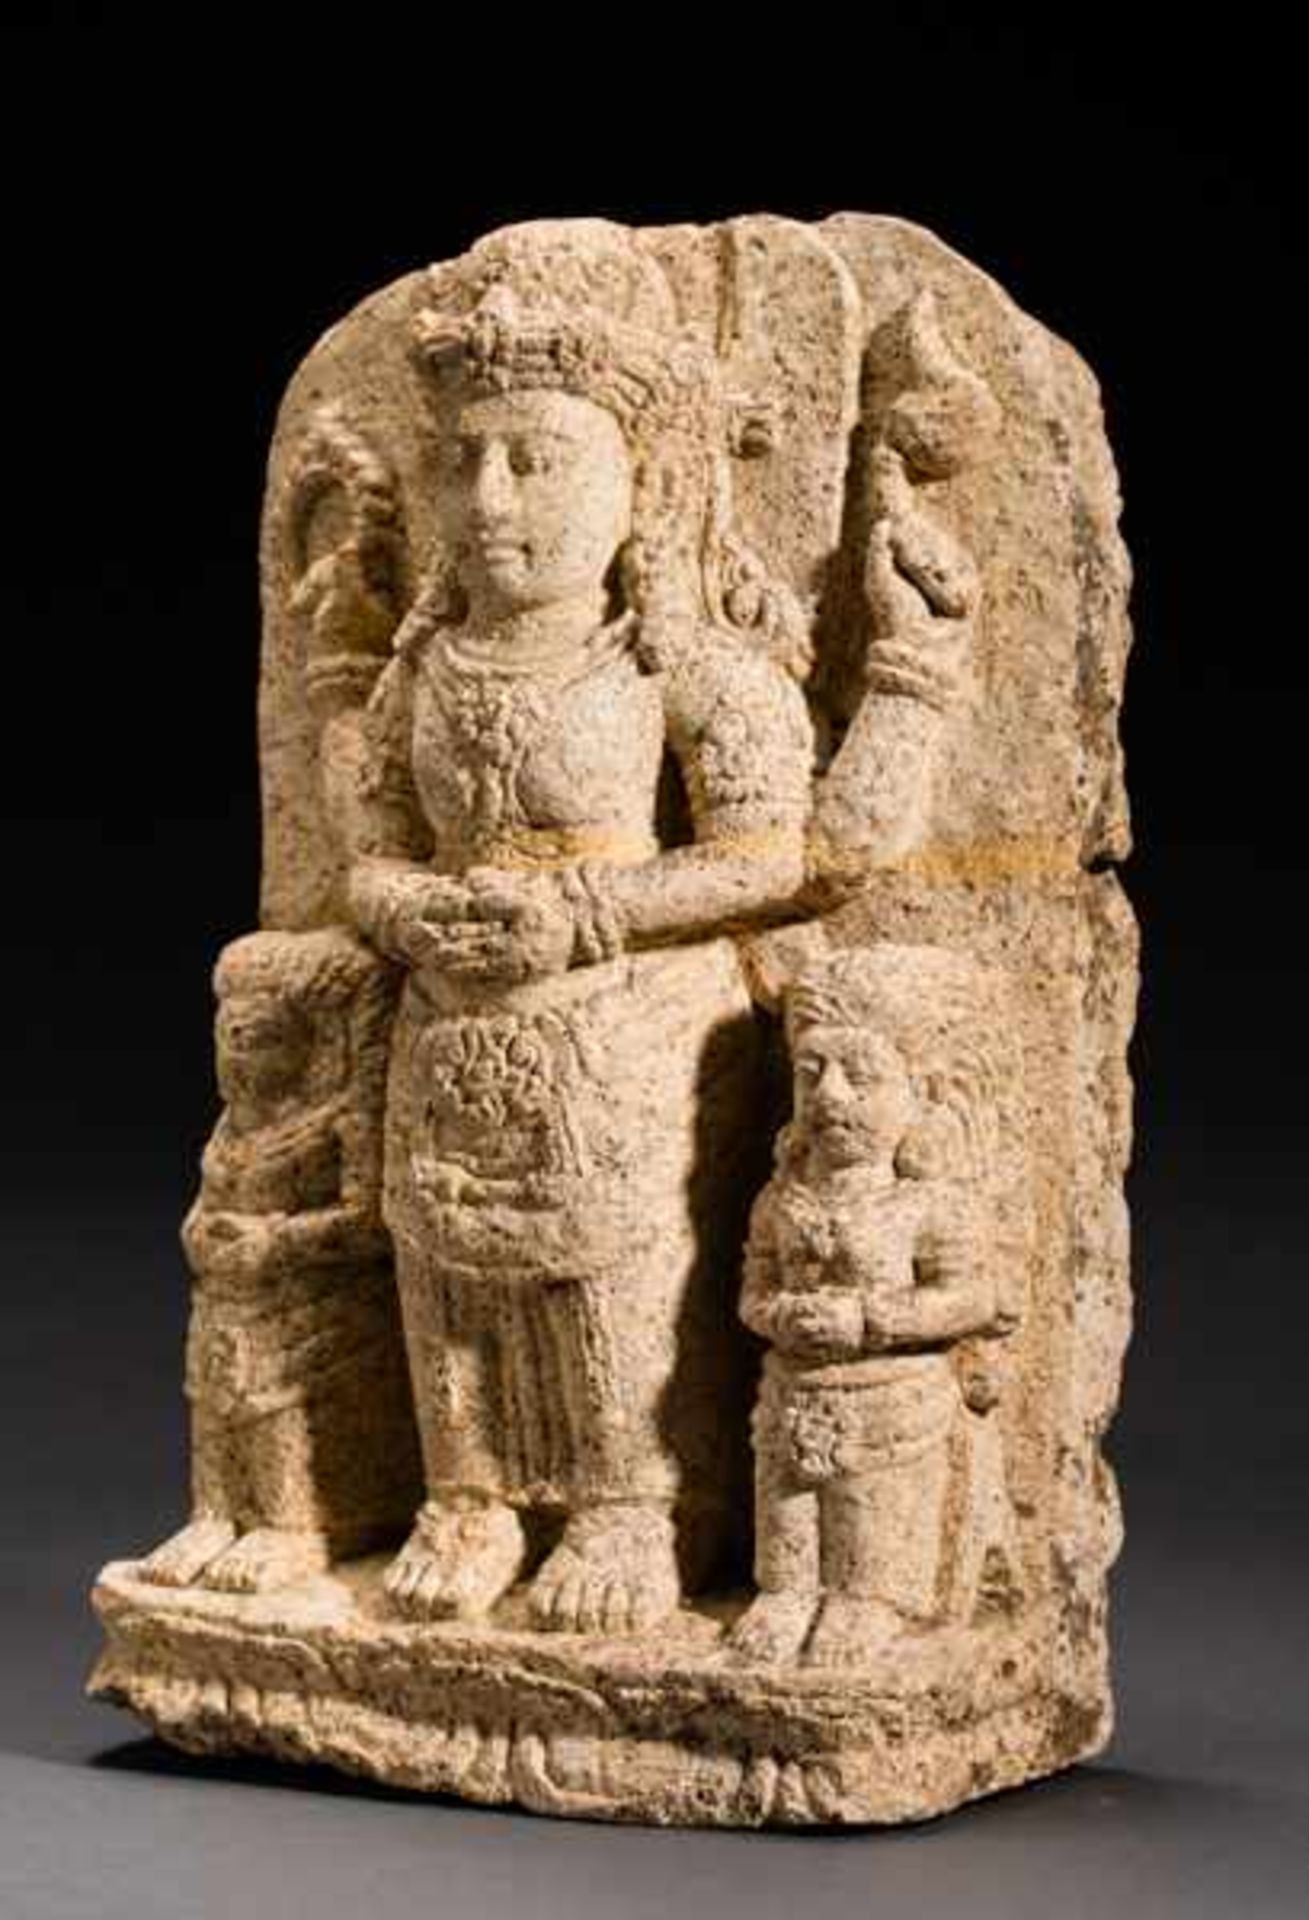 HIGH GOD VISHNU WITH WIVES Tuff. Majapahit, 14th to 15th cent.Very rare stele featuring the high, - Image 2 of 5